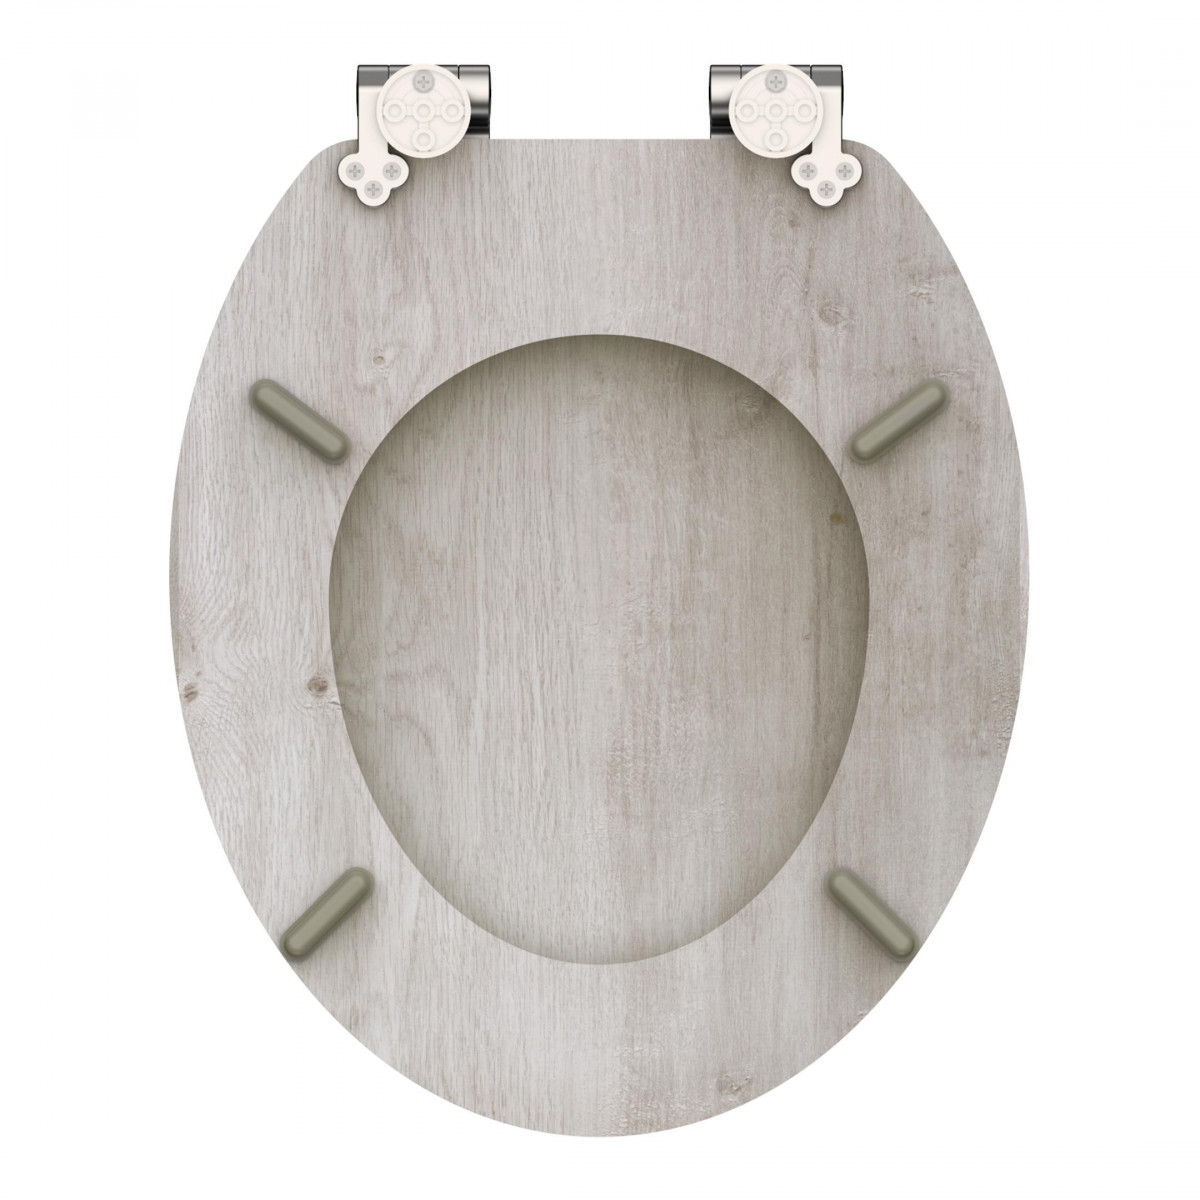 MDF Toilet Seat LIGHT WOOD with Soft Close